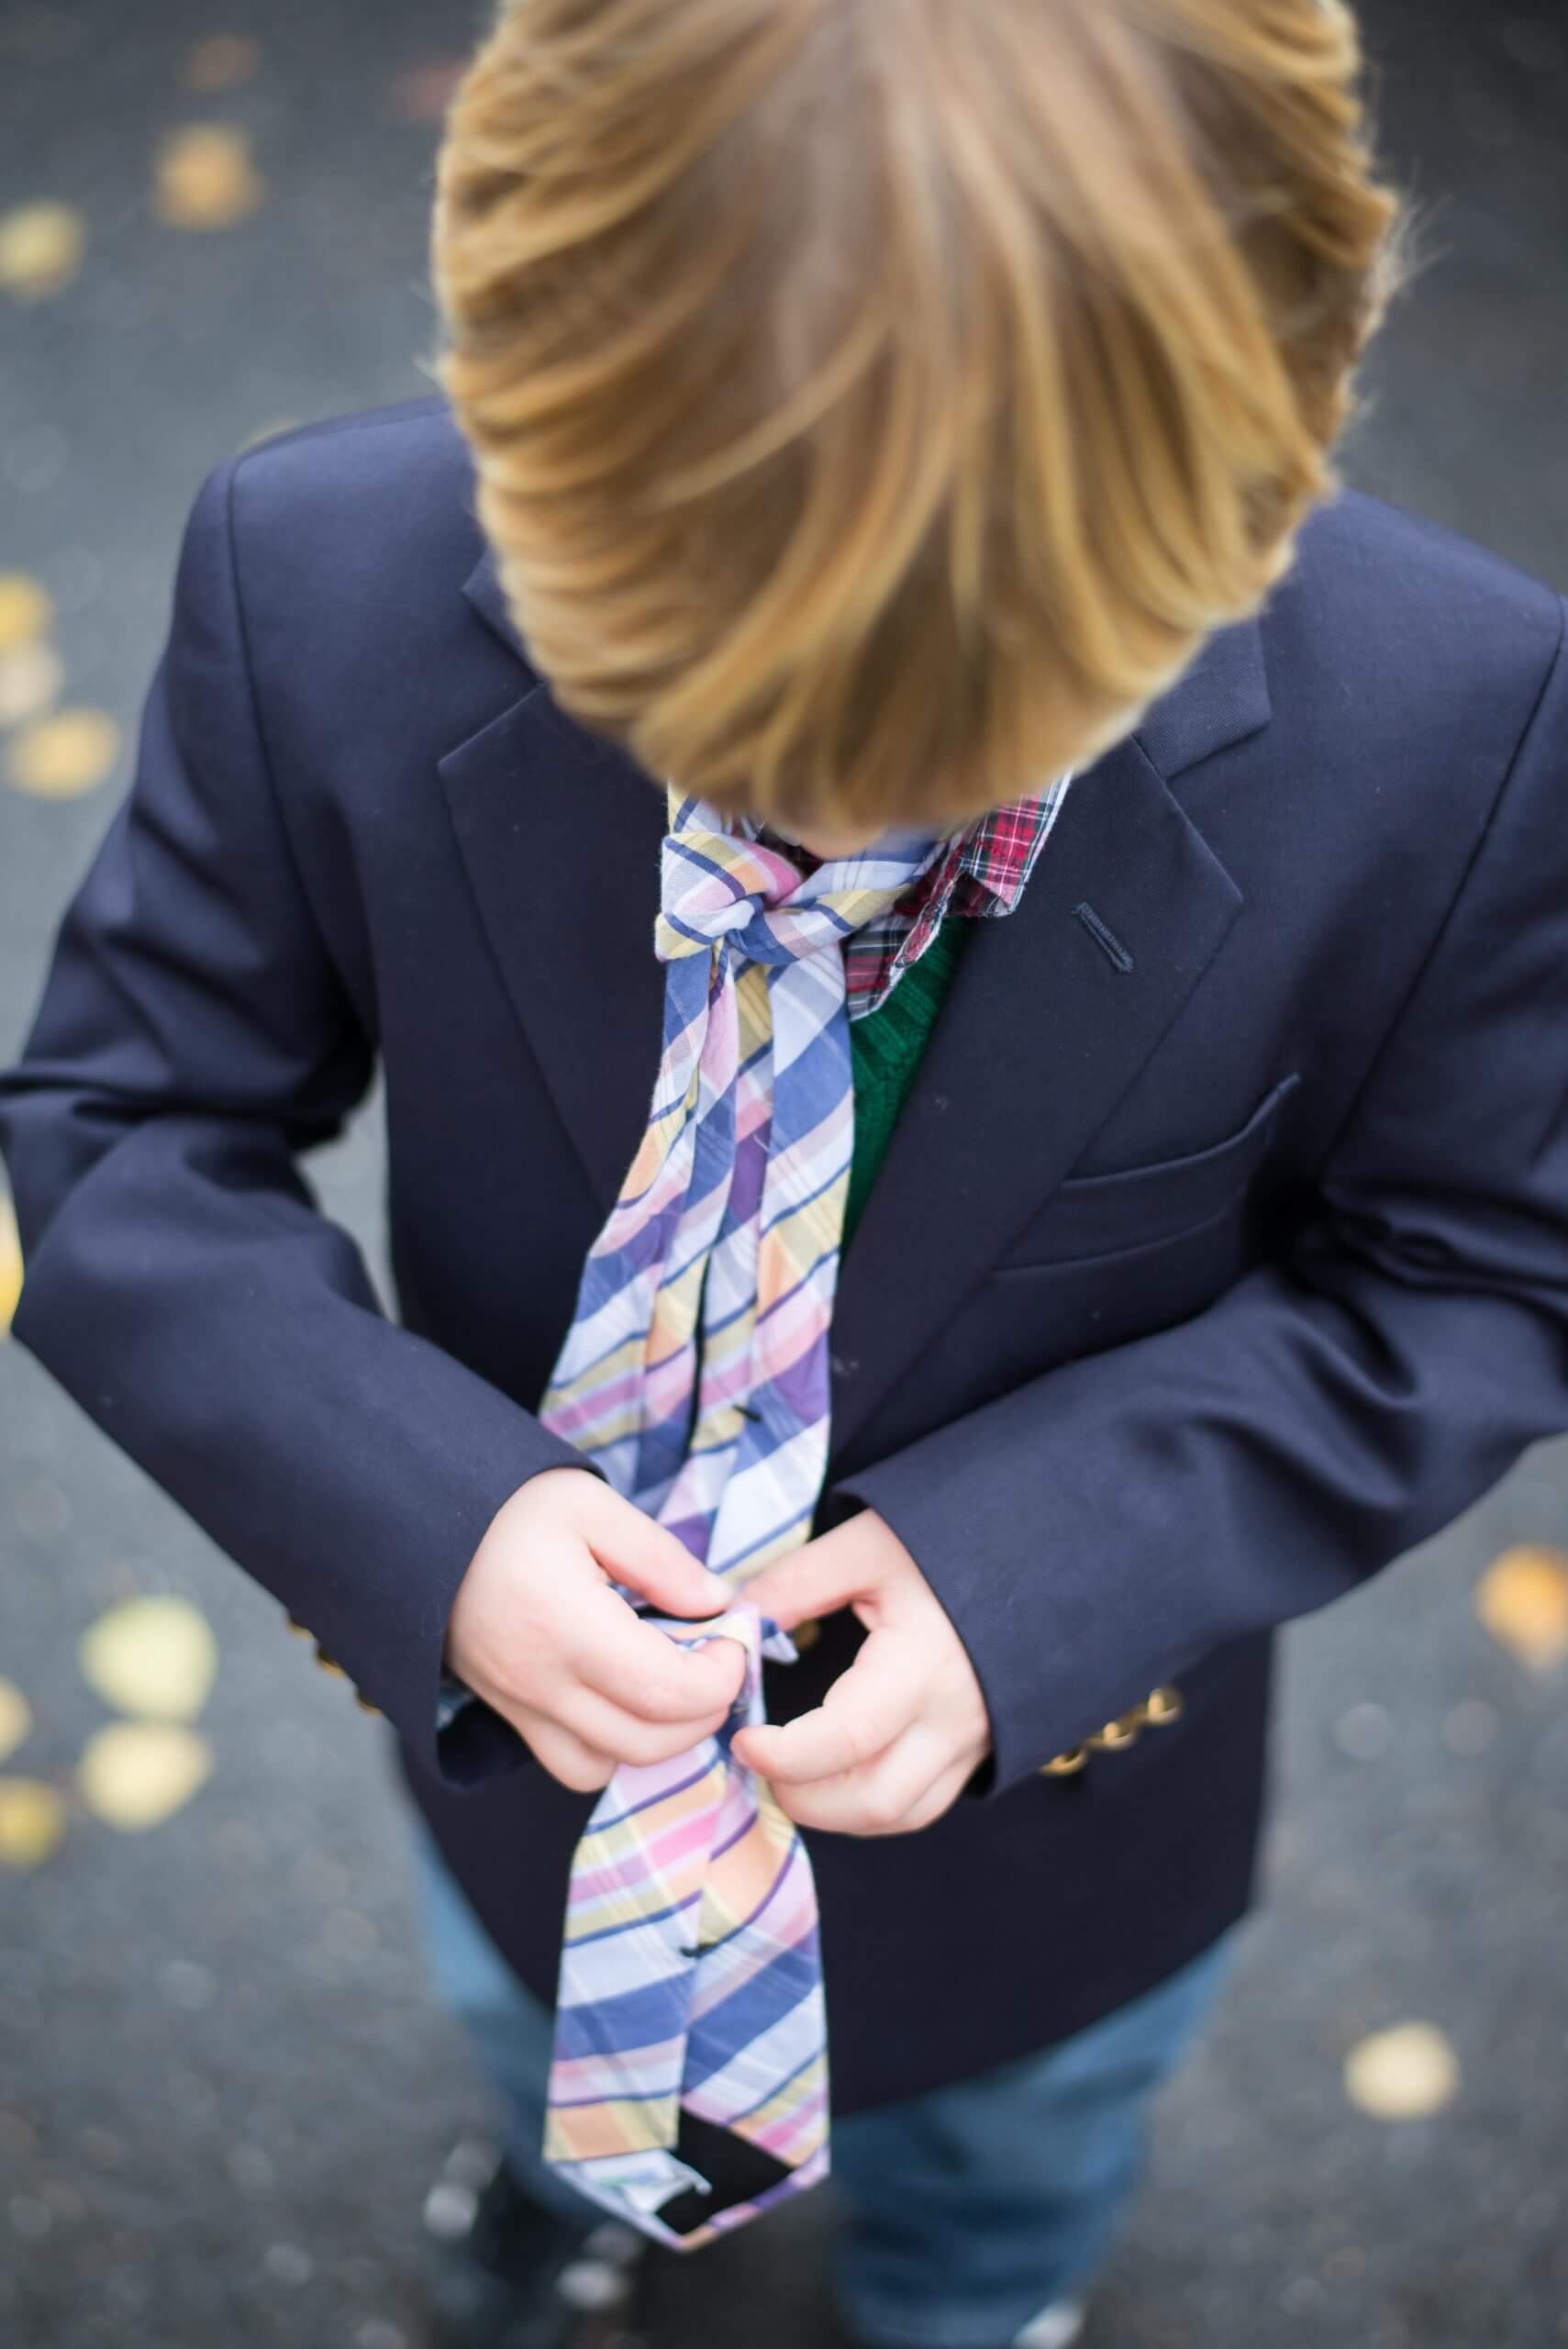 A view looking down over a child holding the tail of a tie loosely tied around his neck.